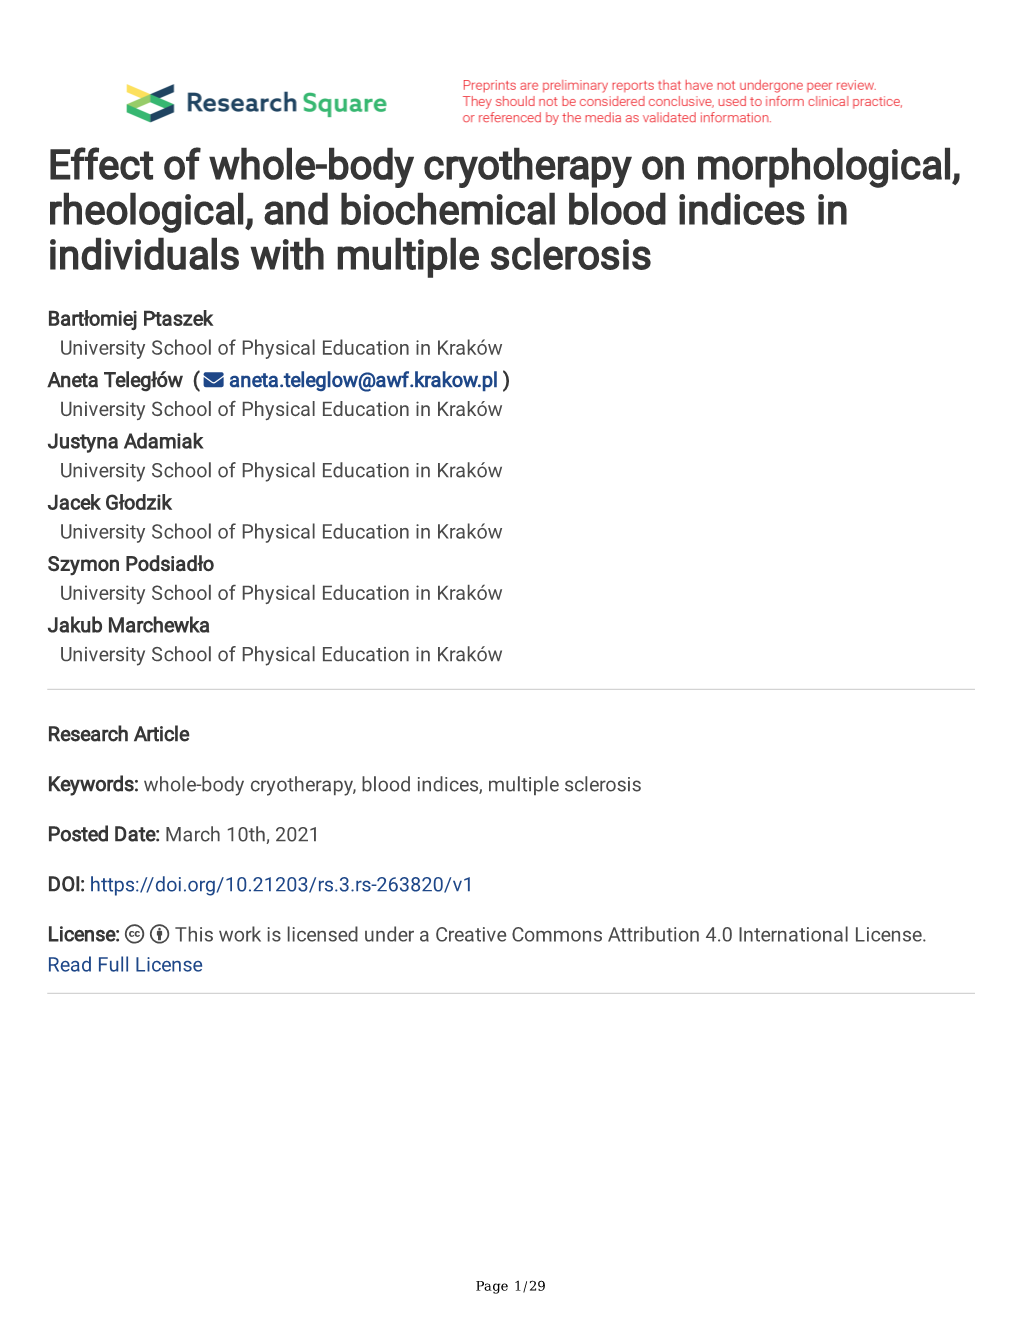 Effect of Whole-Body Cryotherapy on Morphological, Rheological, and Biochemical Blood Indices in Individuals with Multiple Sclerosis